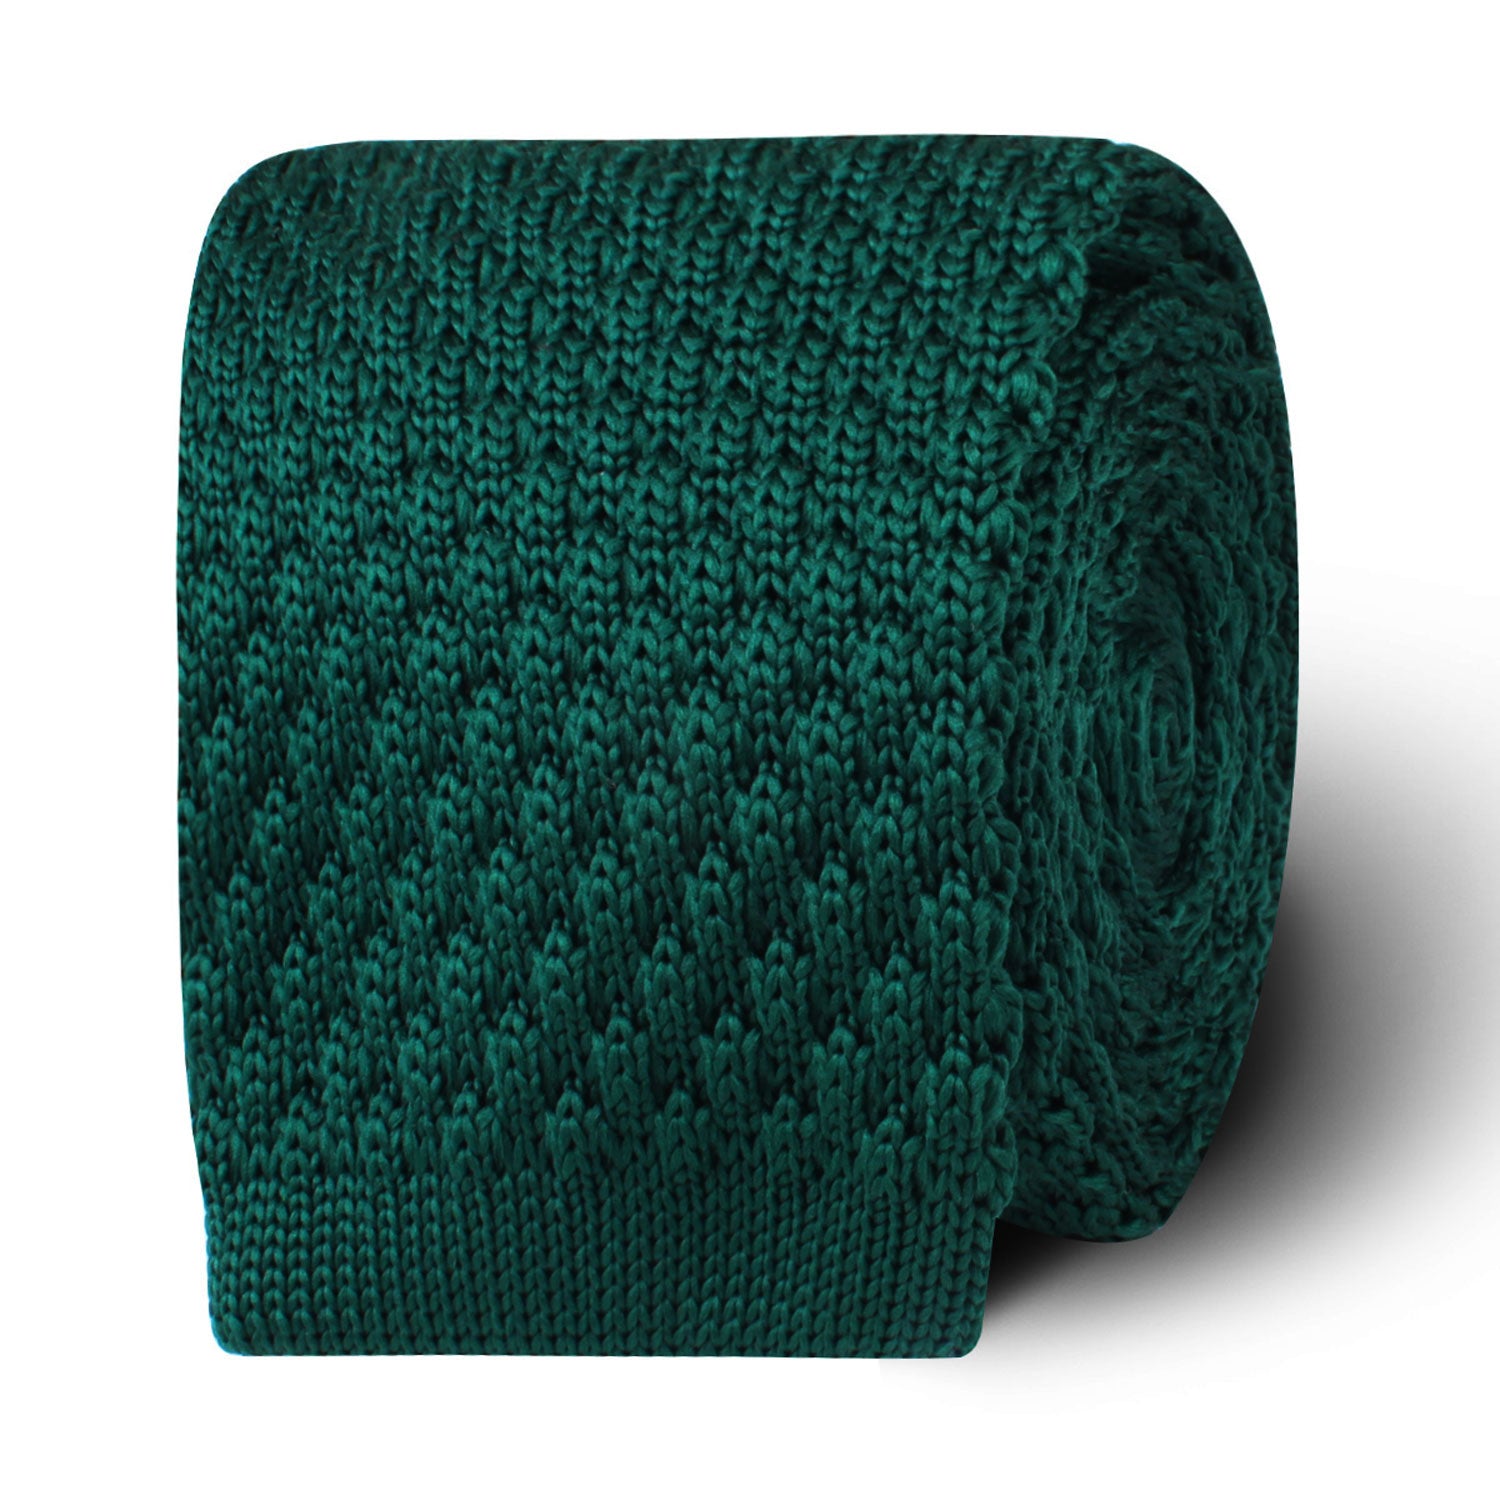 Rio Green Knitted Tie